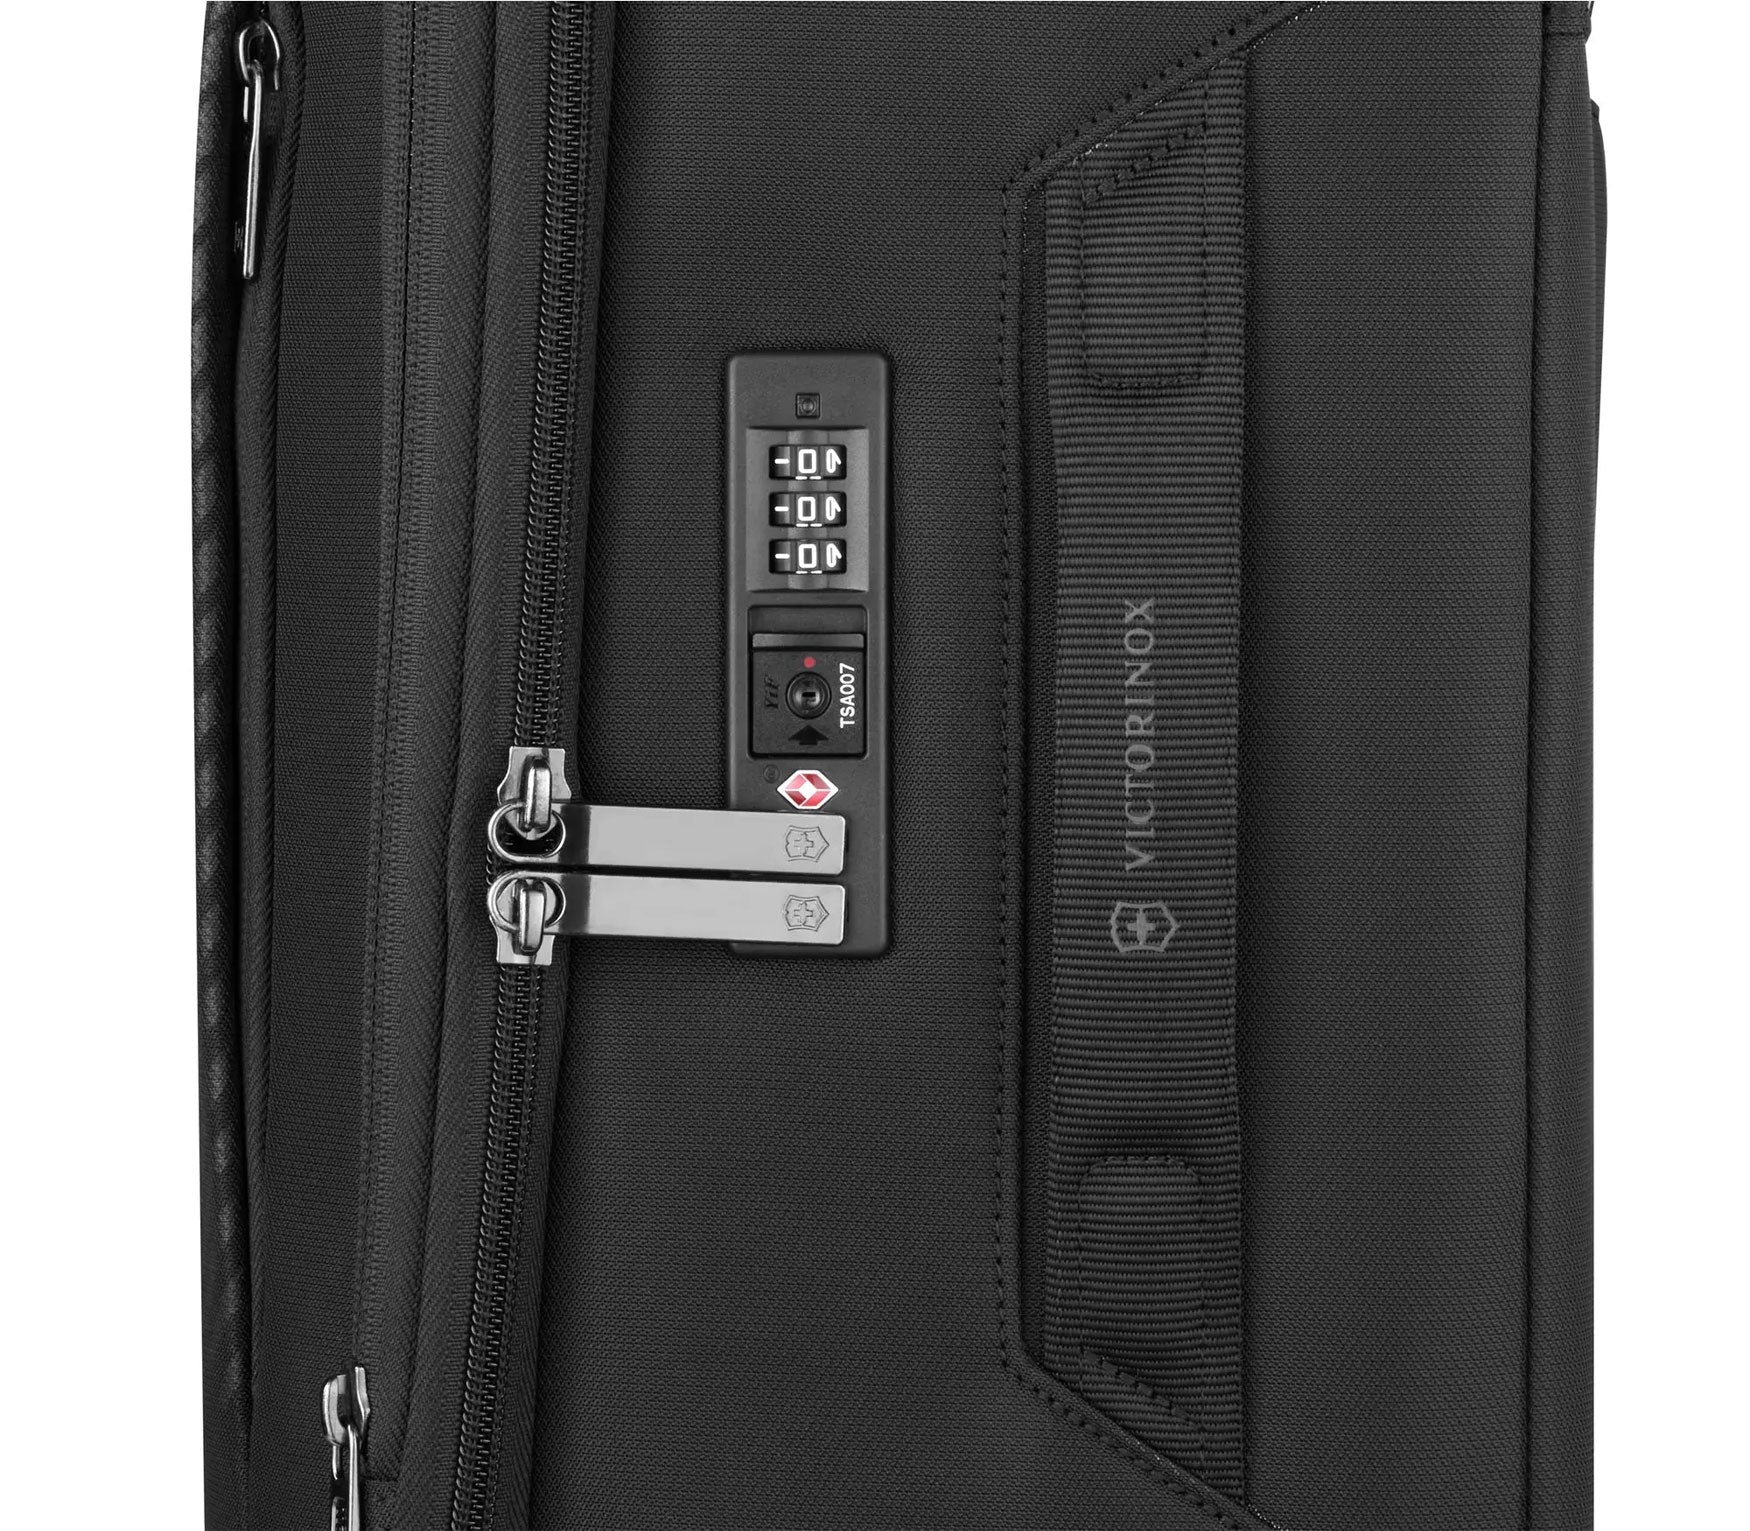 Victorinox Swiss Army Crosslight Frequent Flyer Plus Softside Carry-On